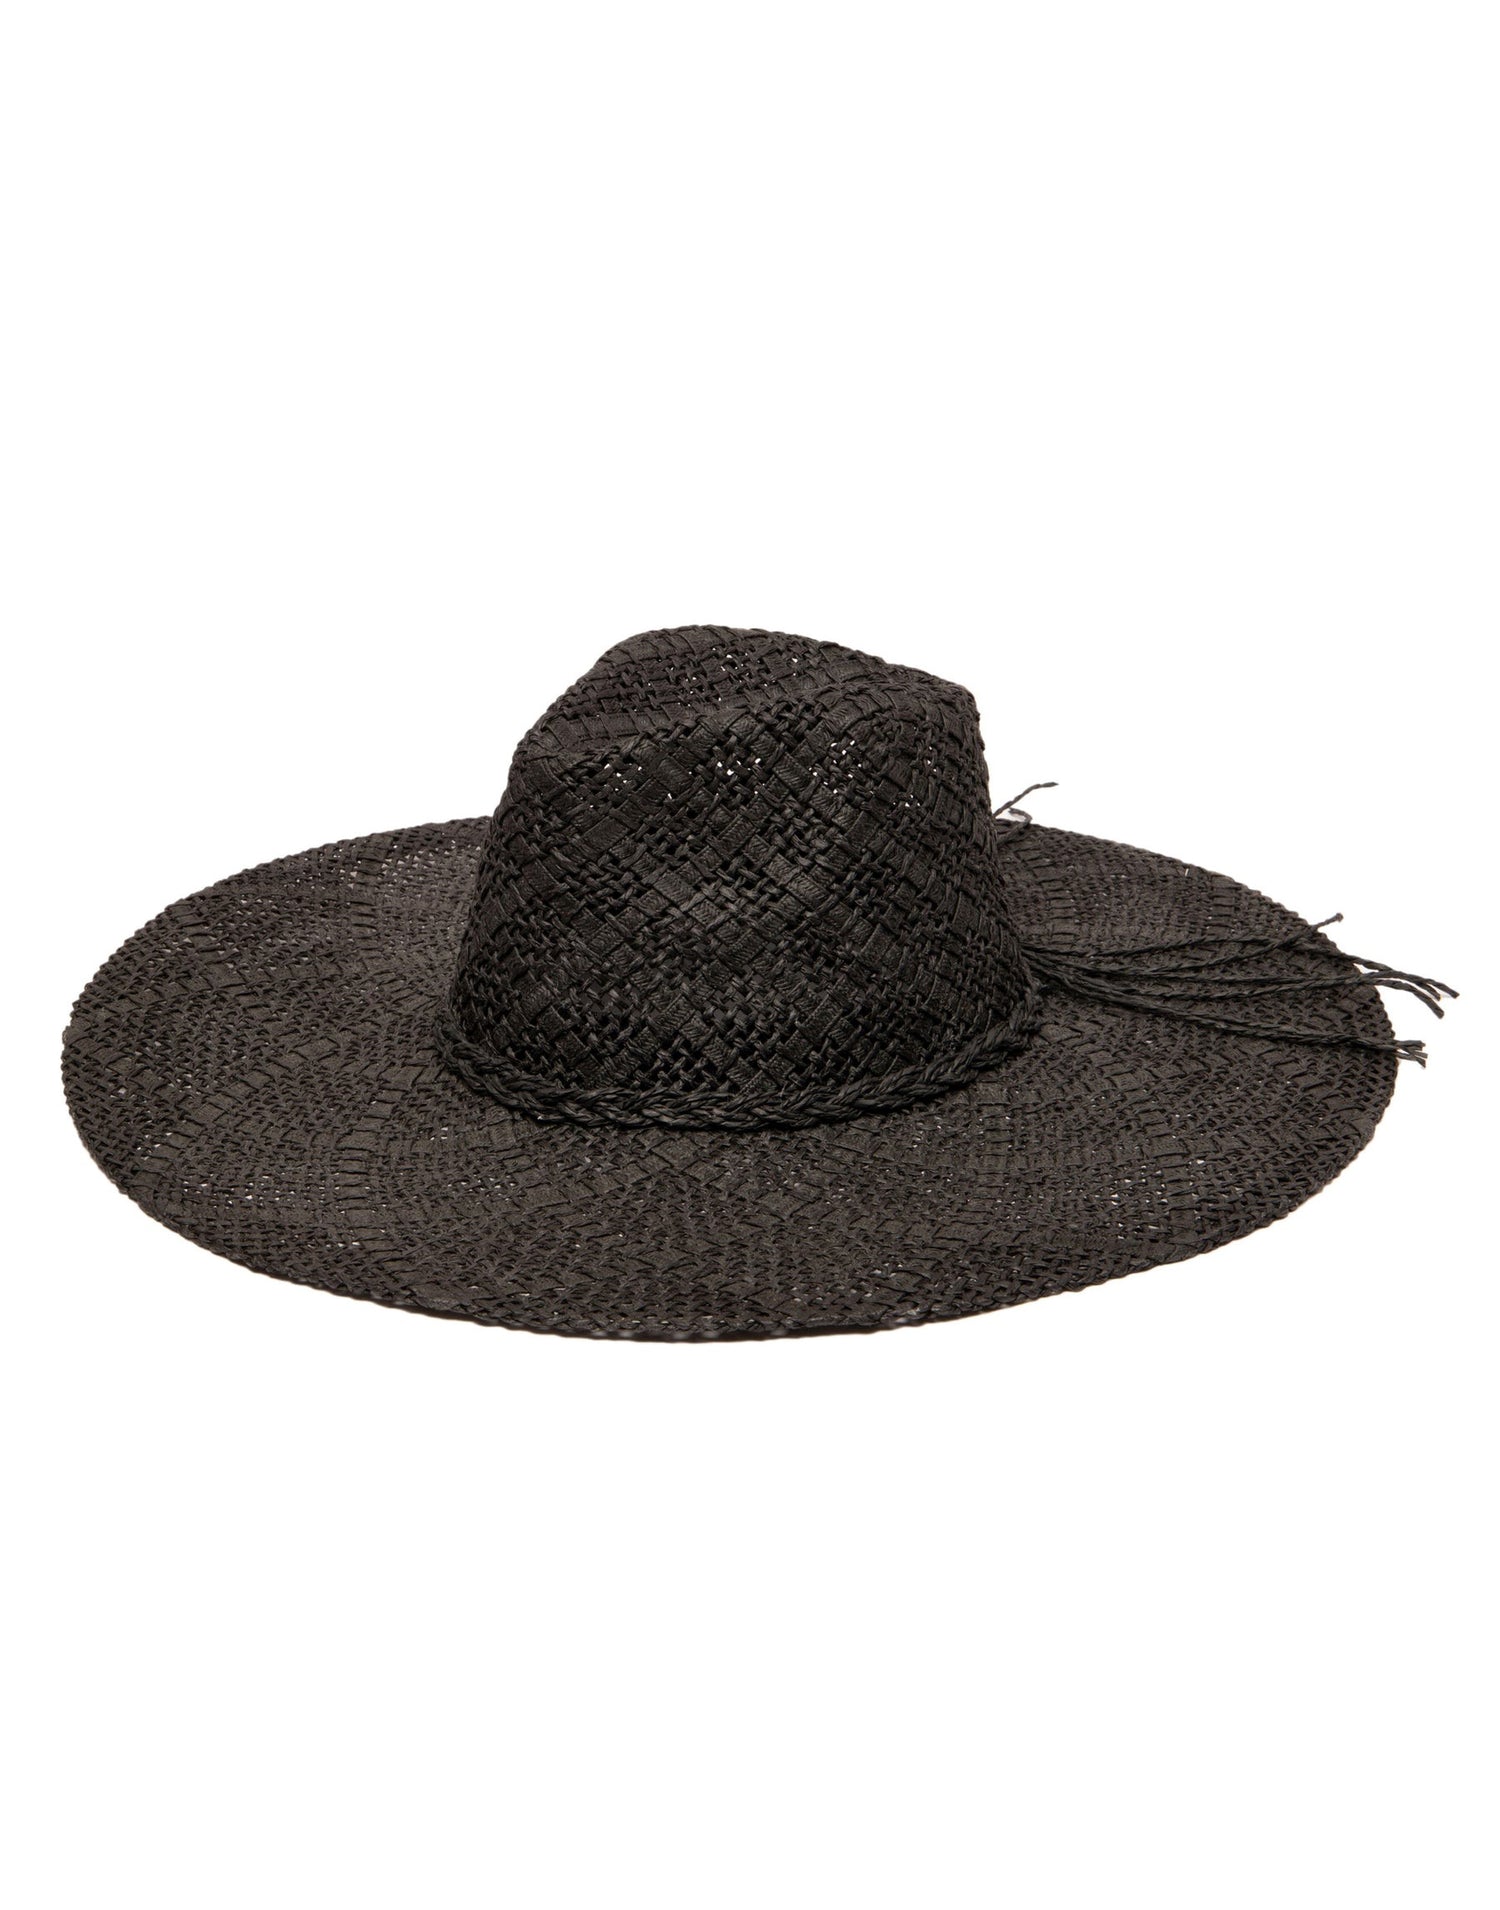 Sun Dialed Fedora by San Diego Hat Company in Black - Angled View